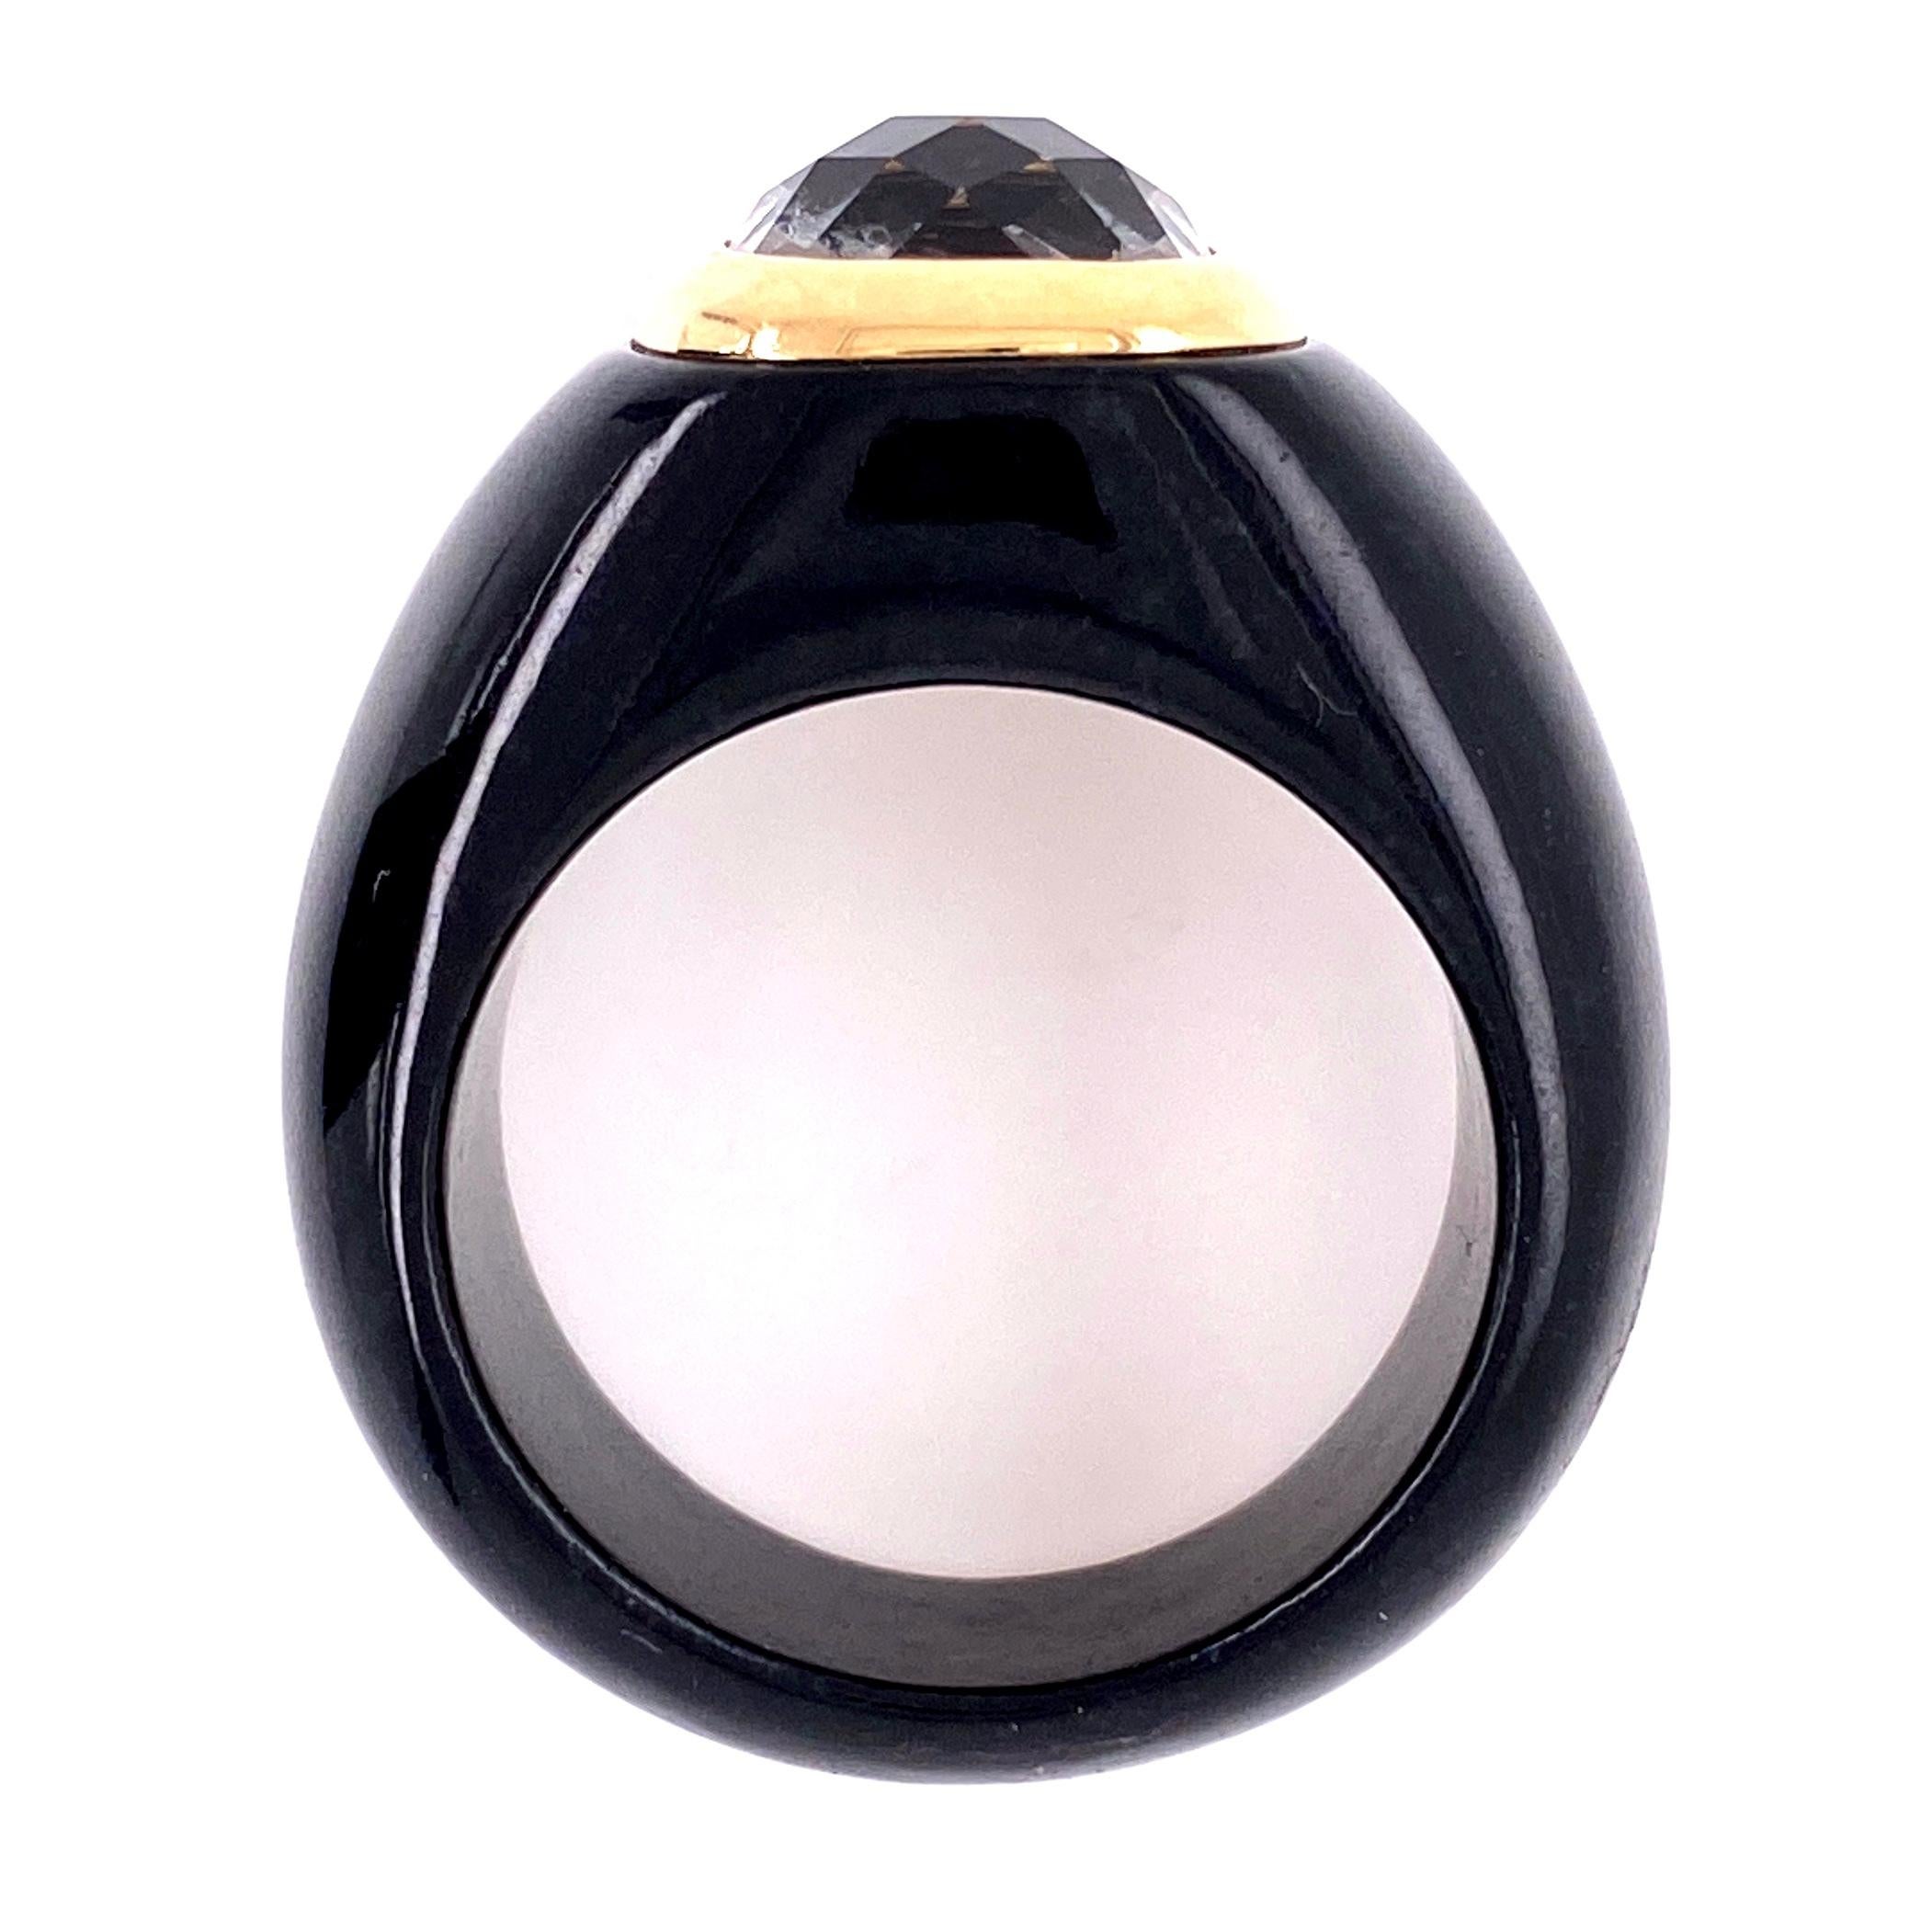 Beautiful Cocktail Dress Ring, centering a 12.2 Carat Checker-board Quartz; Black Resin and 14 Karat Yellow Gold; ring size 10. The ring is in excellent condition, recently professionally cleaned and polished. The perfect accessory for the modern